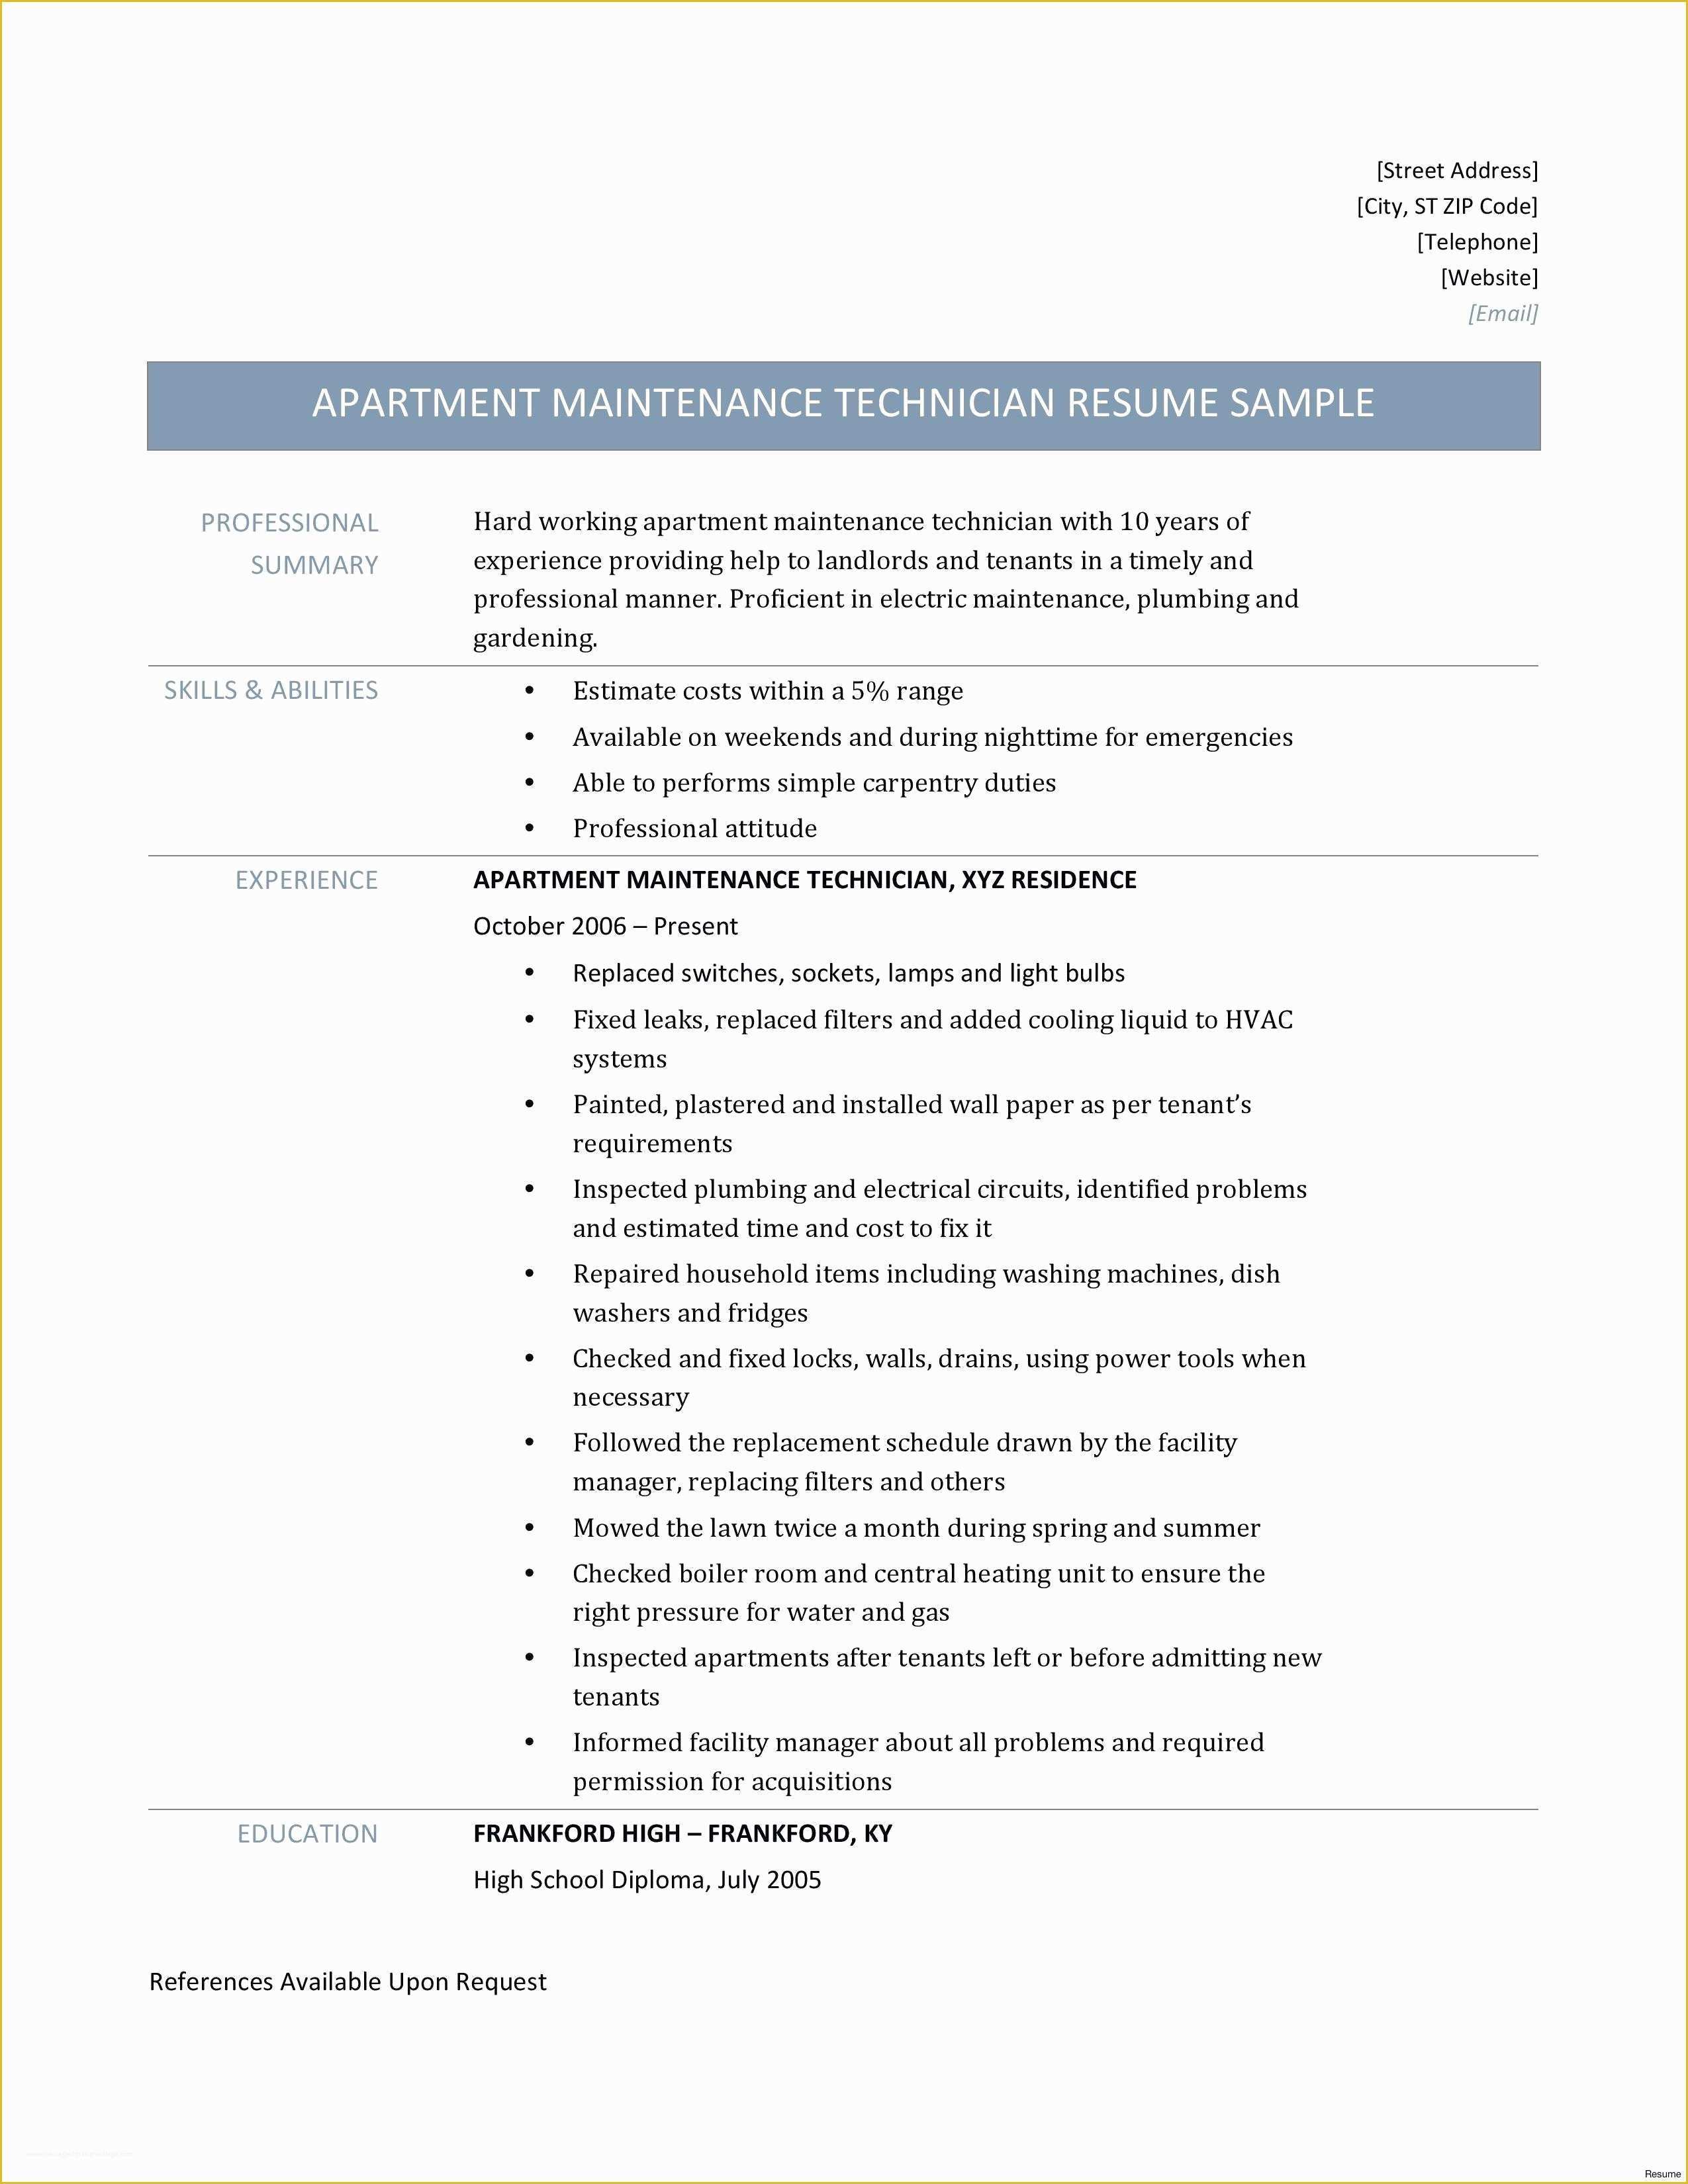 View Free Resume Templates Of View Controller Resume